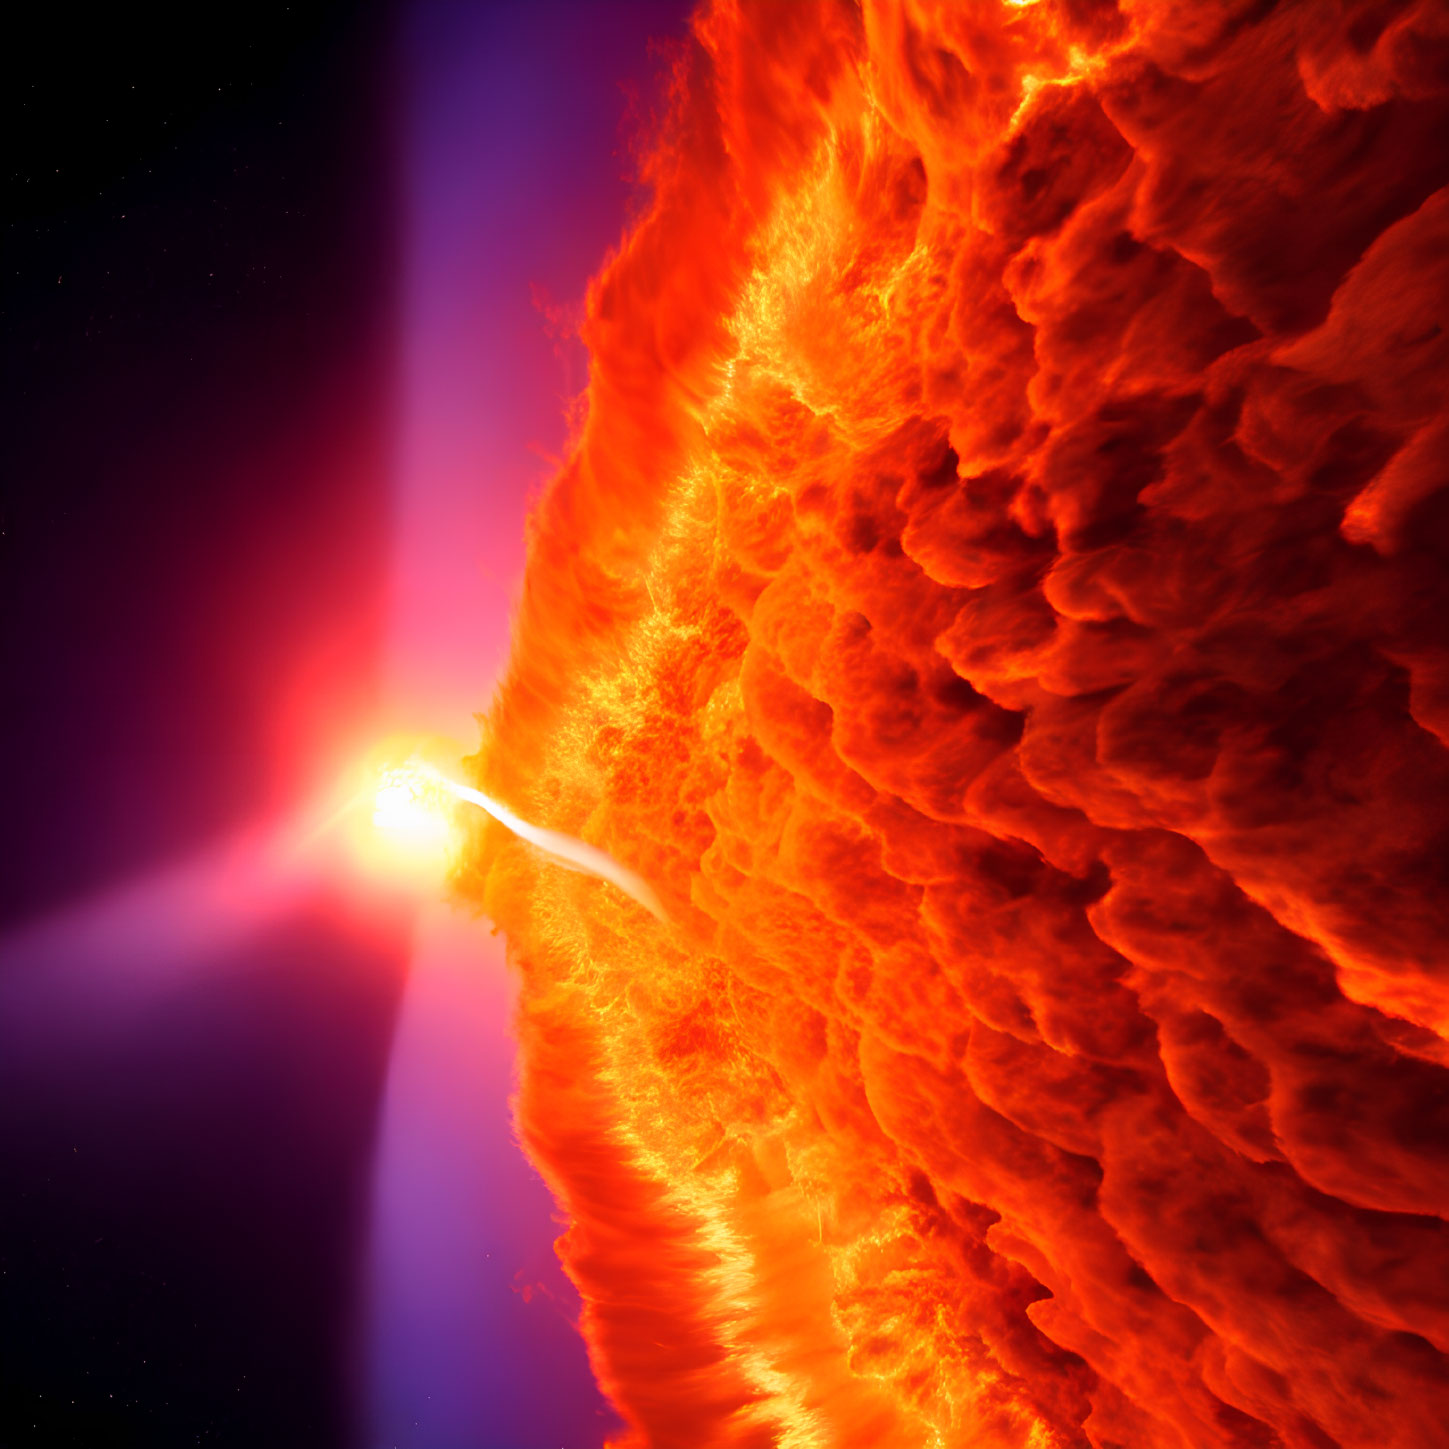 Colorful Solar Flare Eruption from Sun's Surface